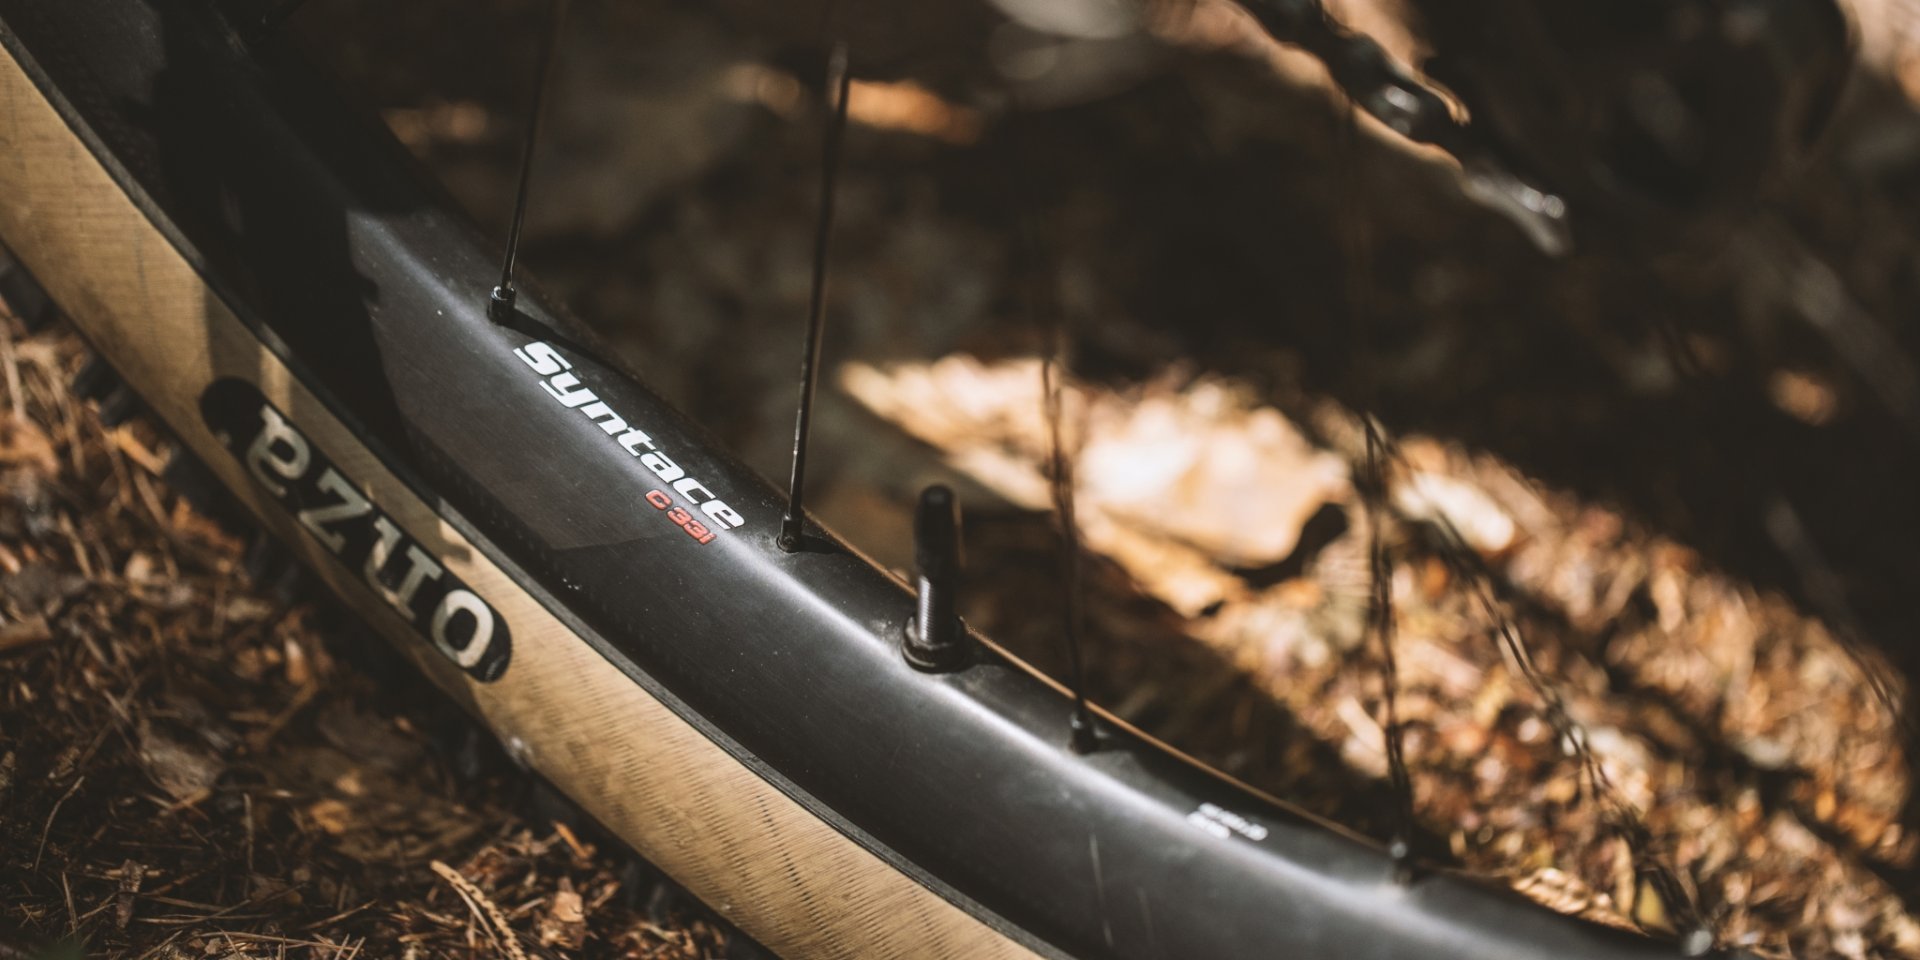 The Liteville 301 MK14 dream MTB bike build made possible thanks to bike-components.de. Riding Syntace c33i carbon wheels makes the bike even better.